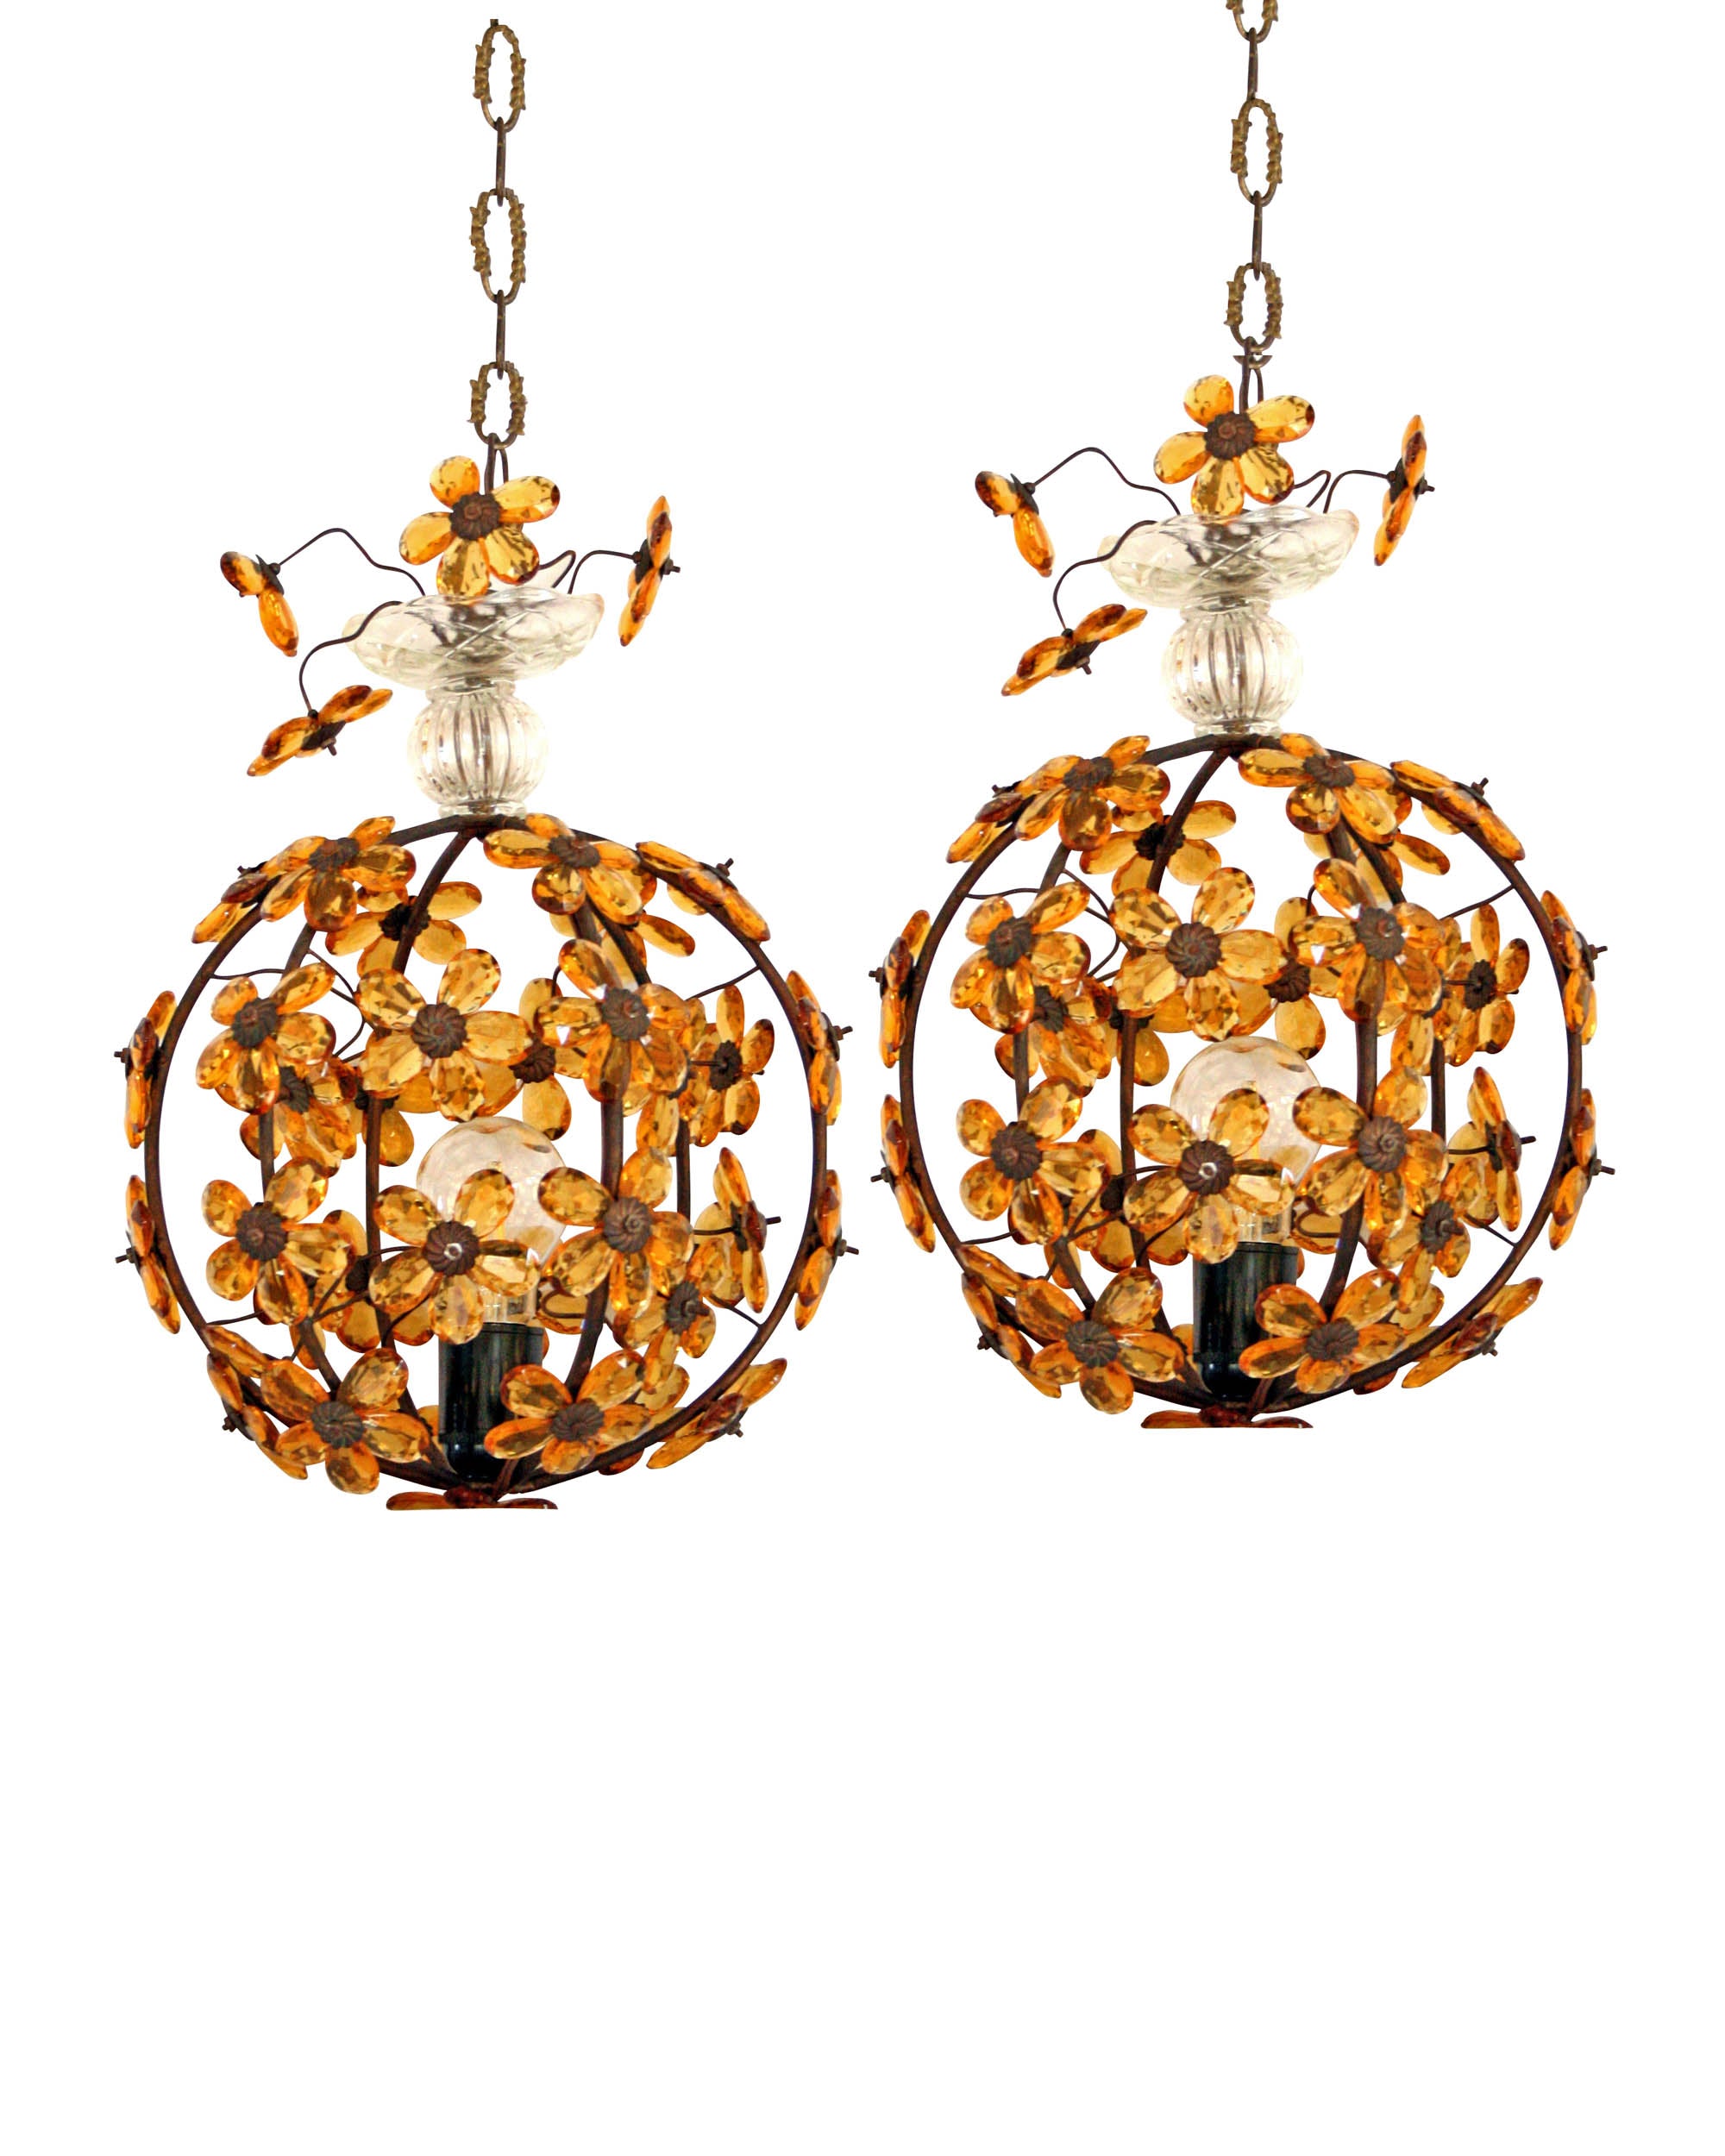 Pair of Italian ceiling lamps with yellow flower decorations and a brass structure